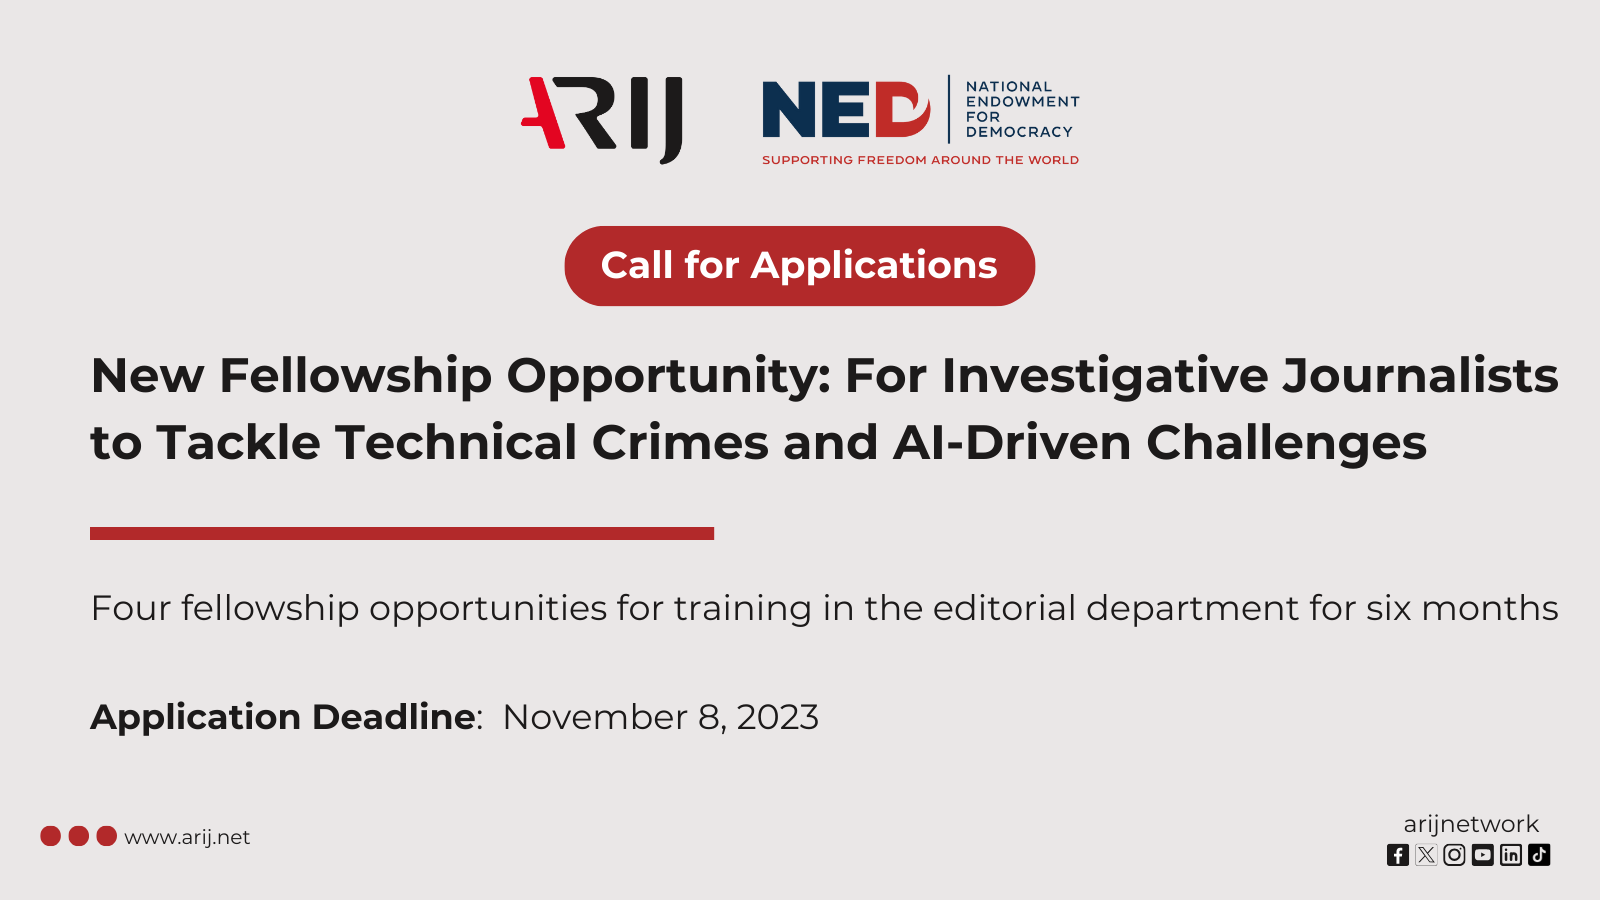 A Call for Investigative Journalists to Tackle Technical Crimes and AI-Driven Challenges